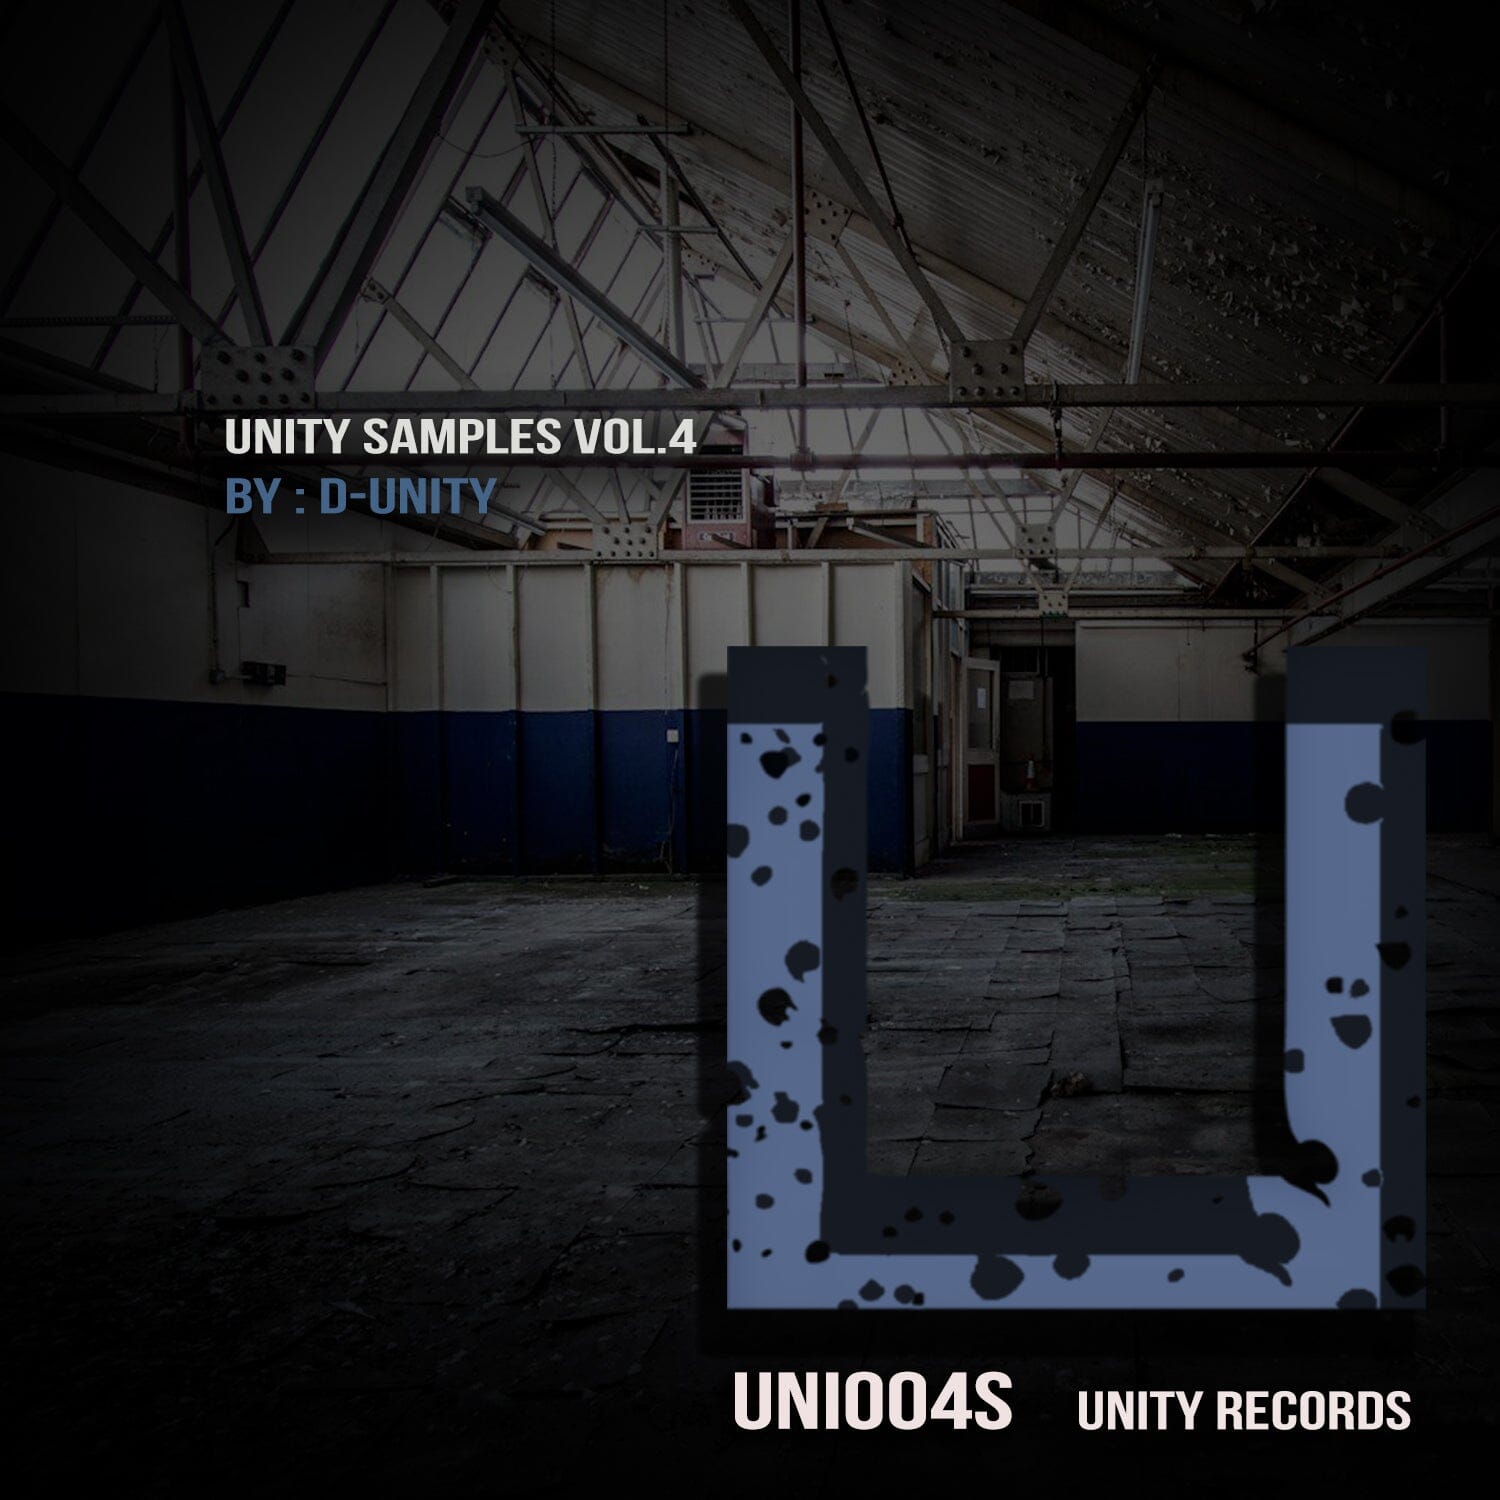 Unity Samples Vol 4 by D-Unity Sample Pack Unity records